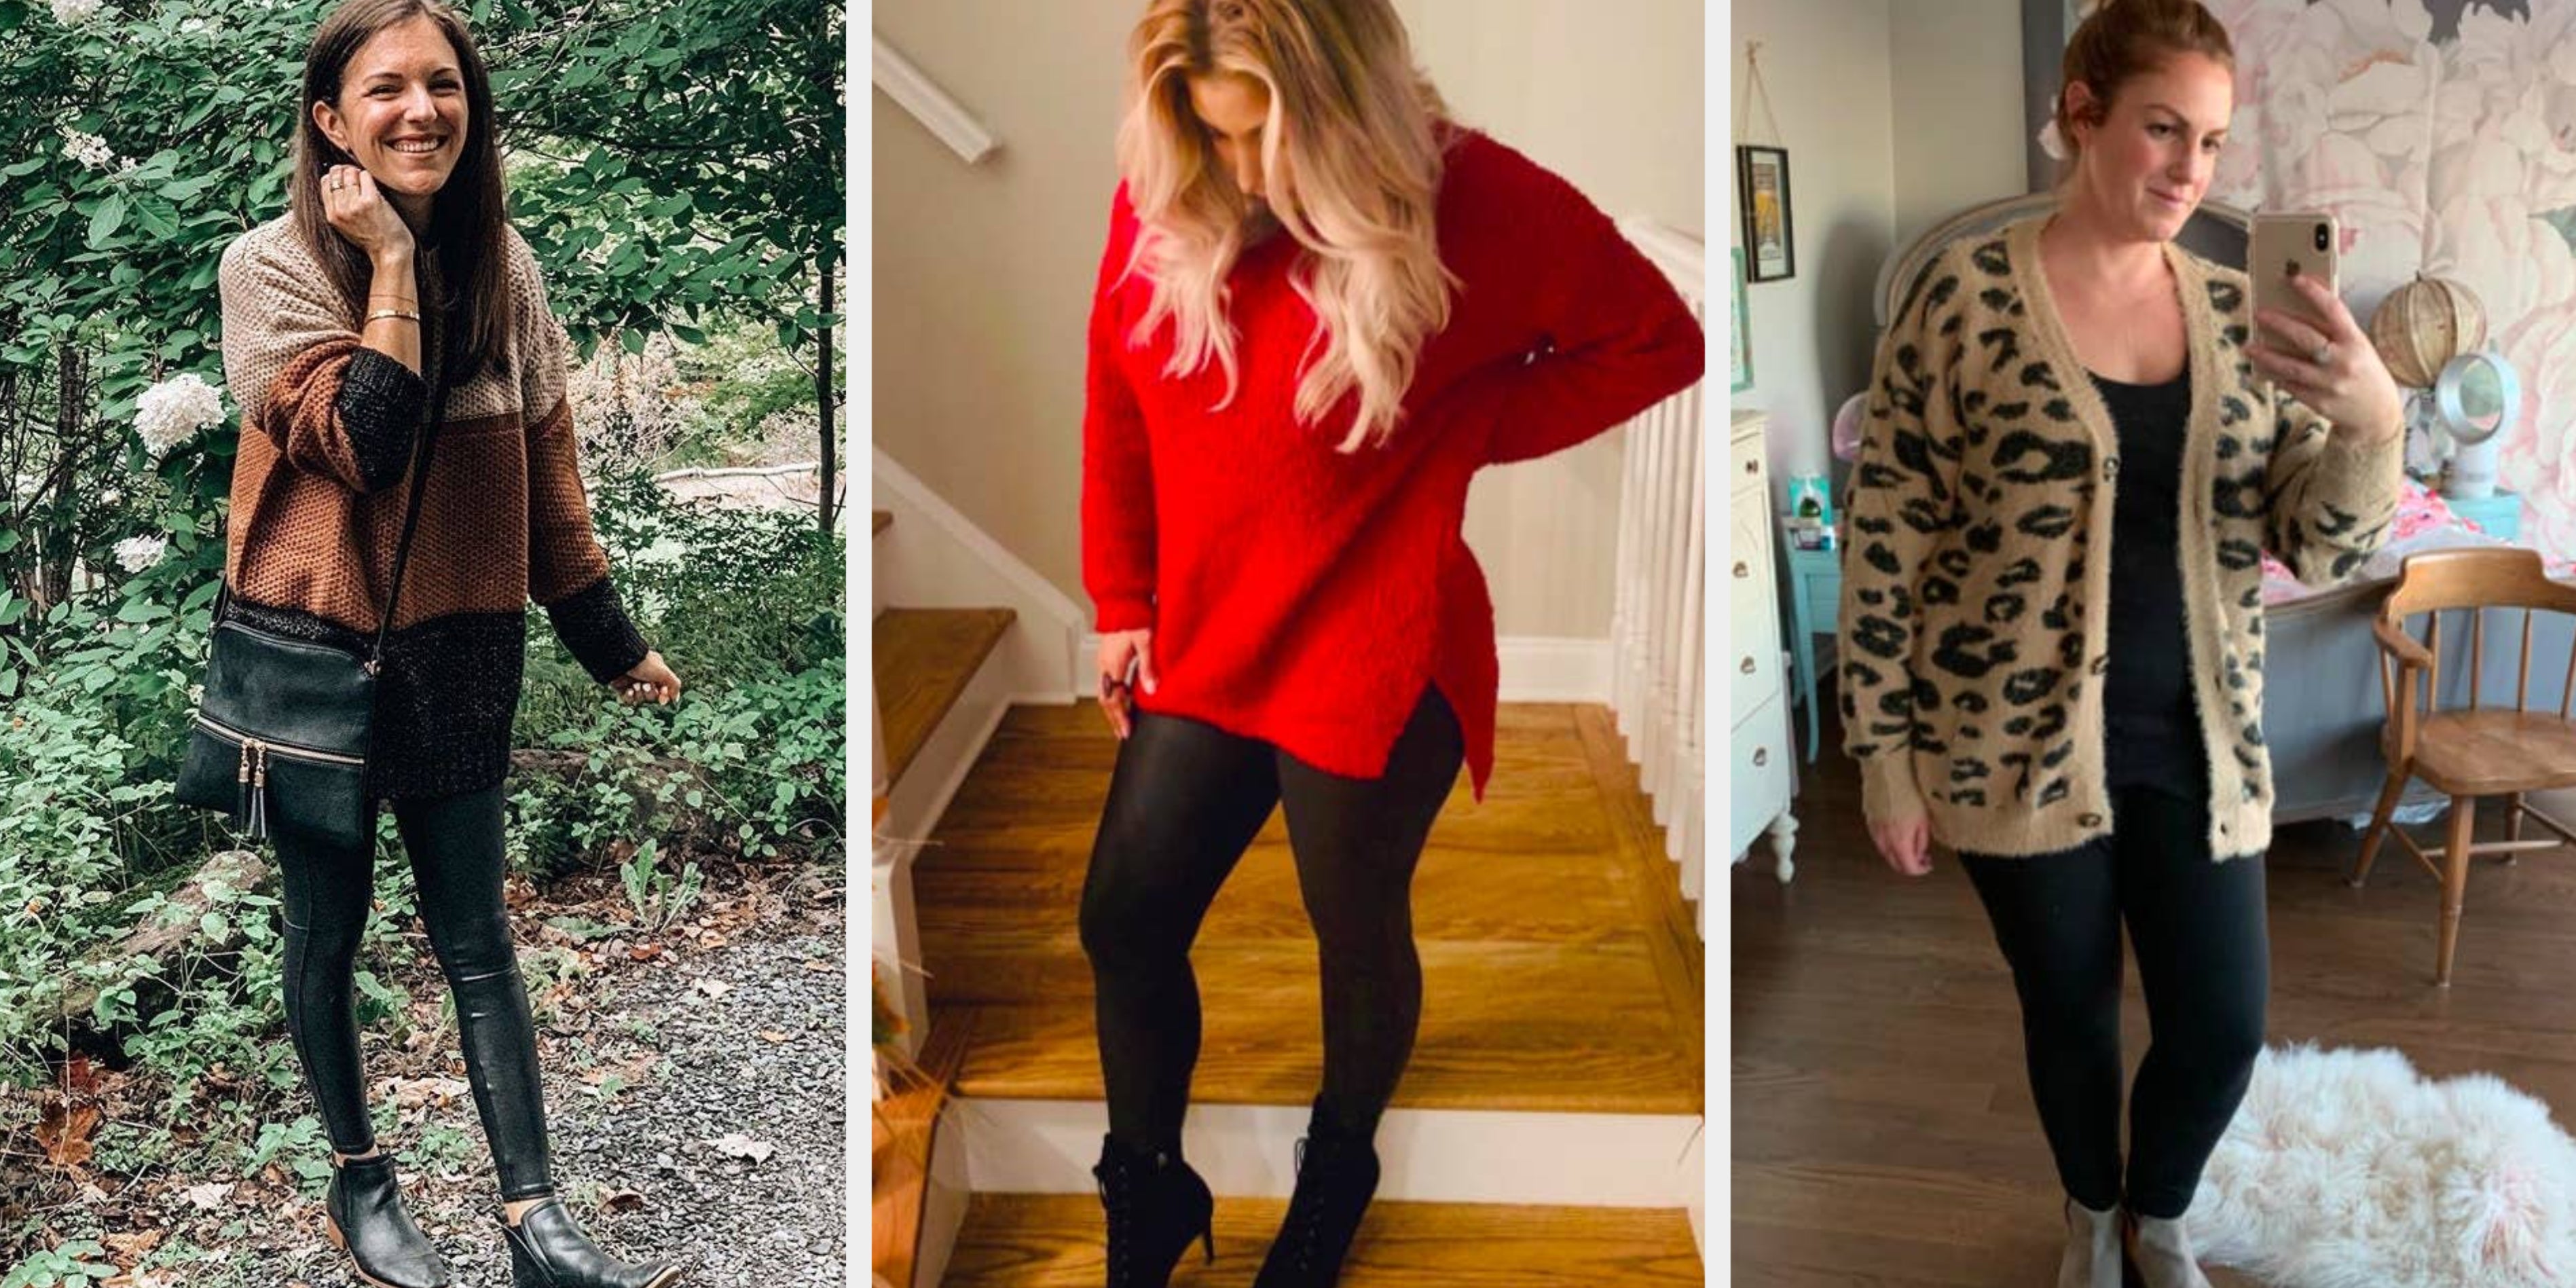 19 Leggings Outfits That Prove You Can Wear Them For Any Occasion